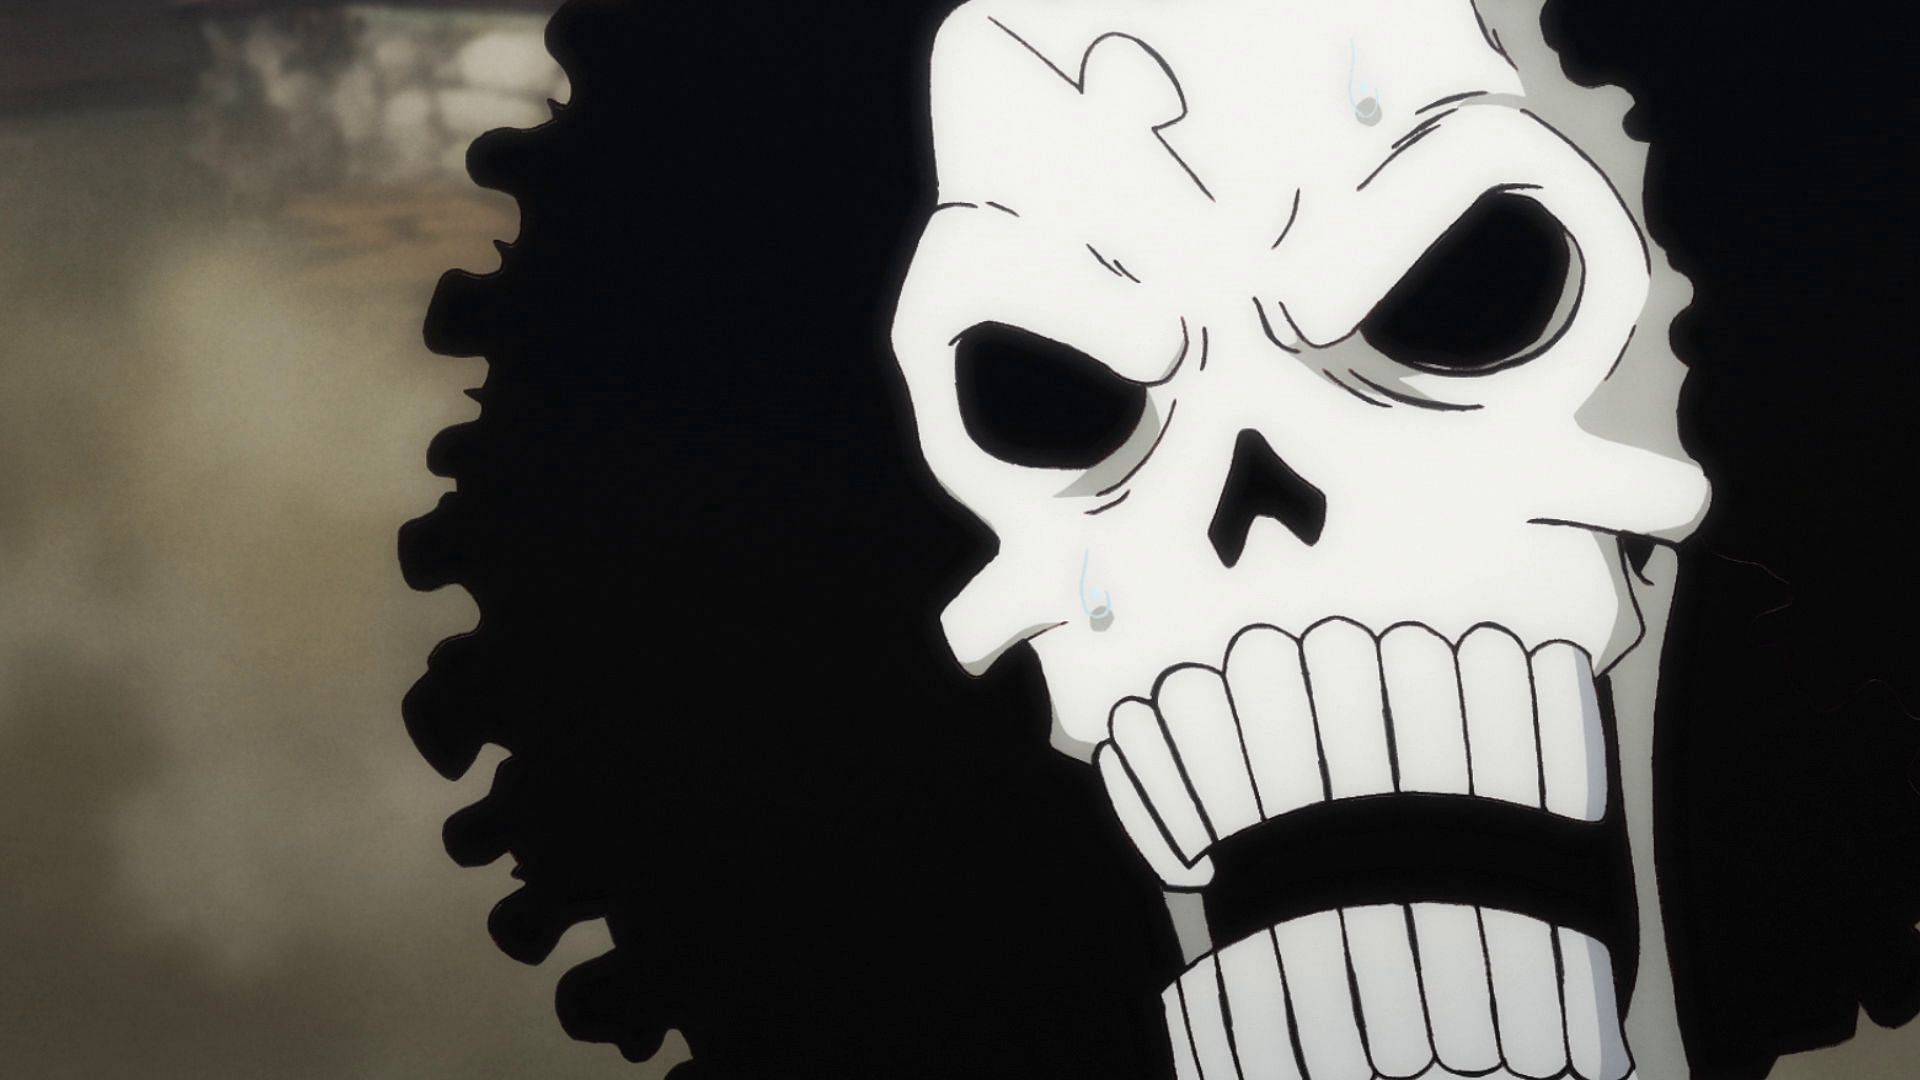 Brook as seen in One Piece (Image via Toei Animation)